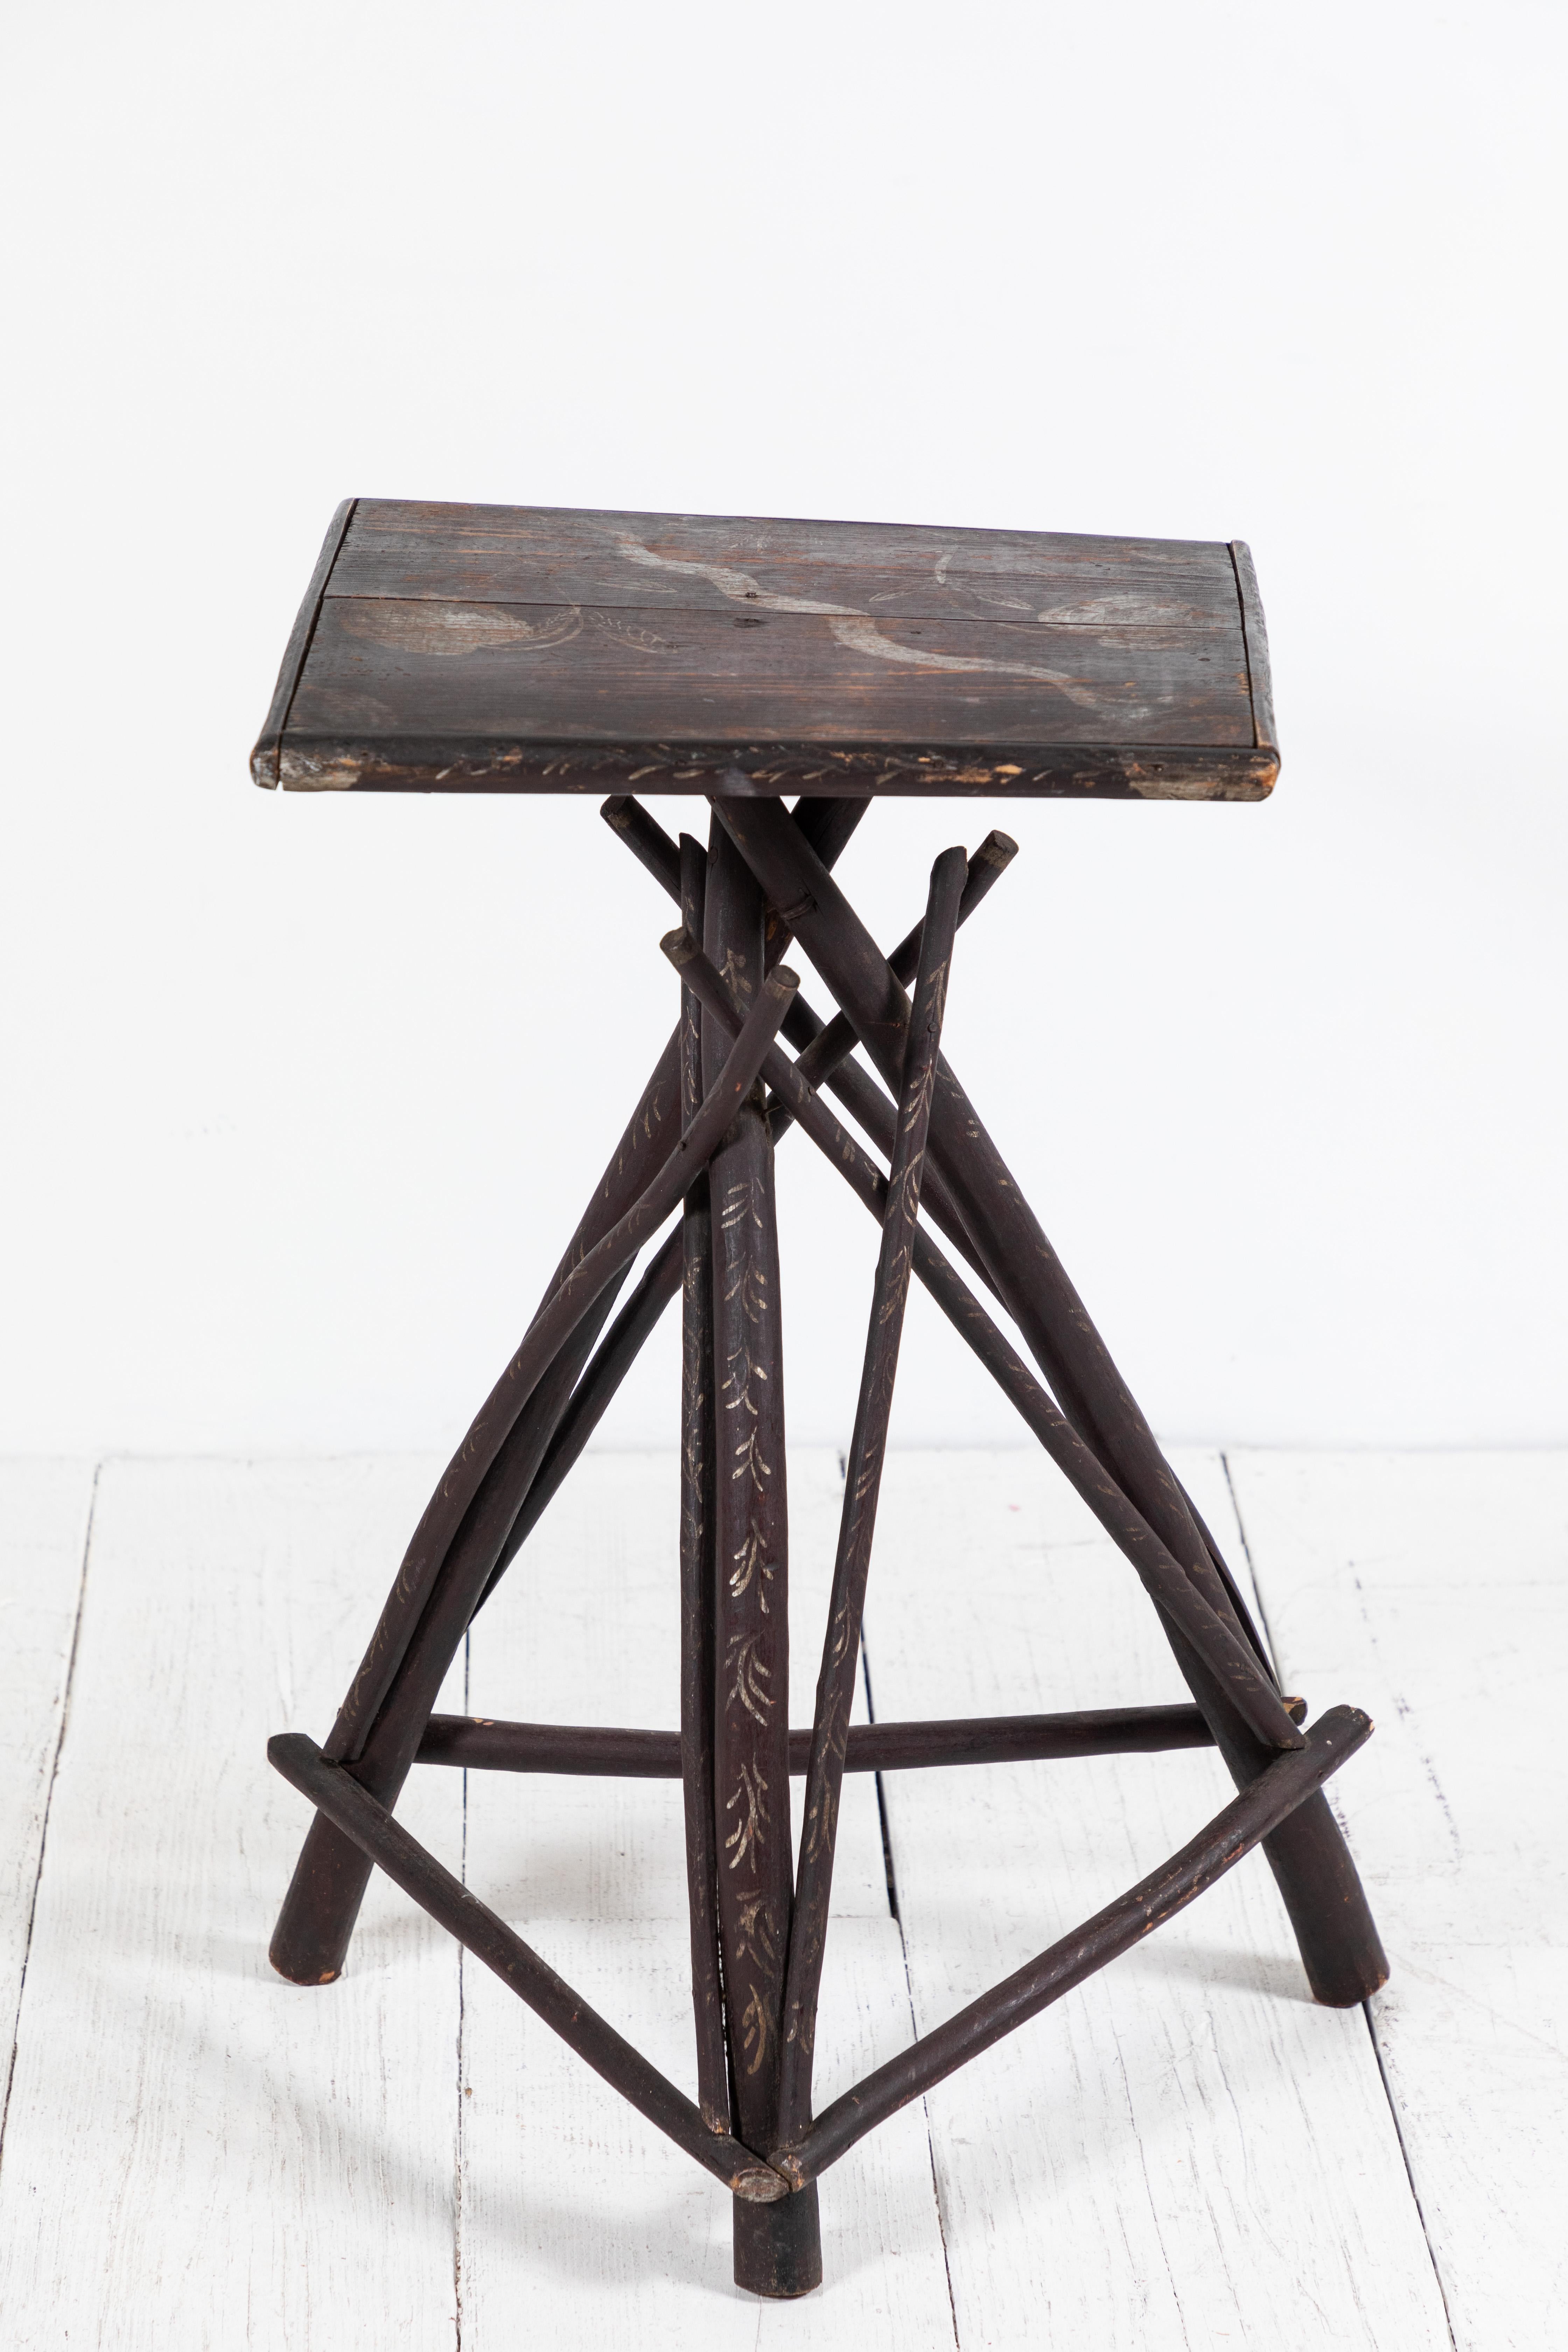 Rustic early American Adirondack style tall side table with stained twig legs and hand painted stenciled top.